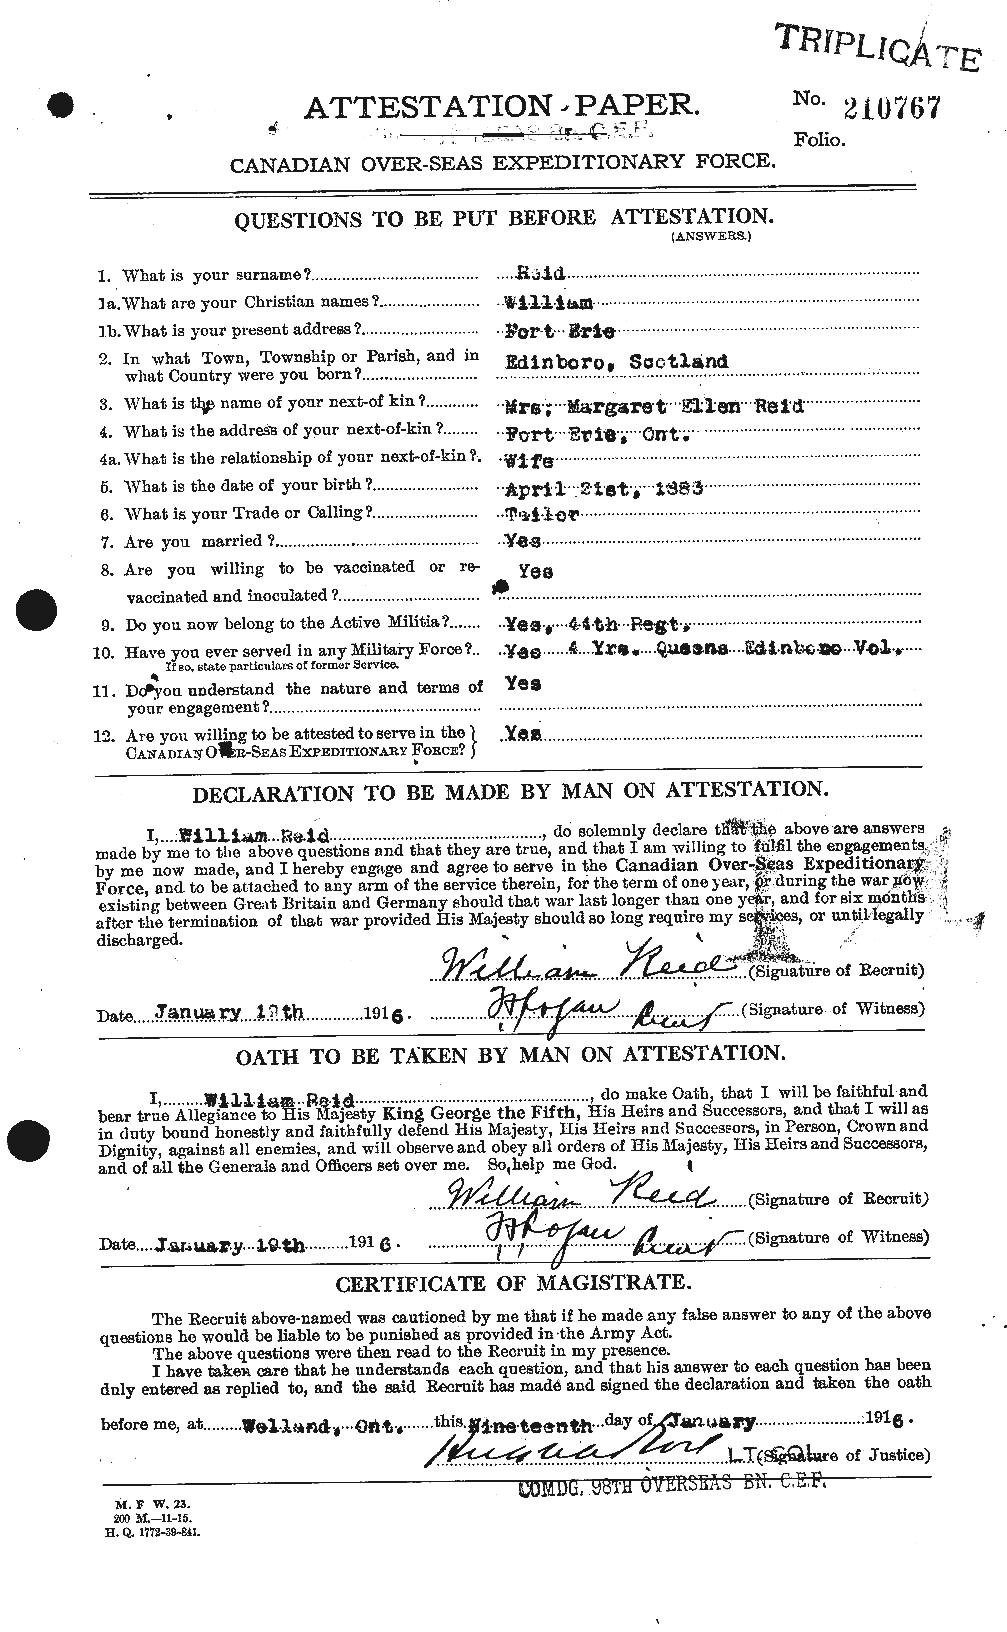 Personnel Records of the First World War - CEF 596943a